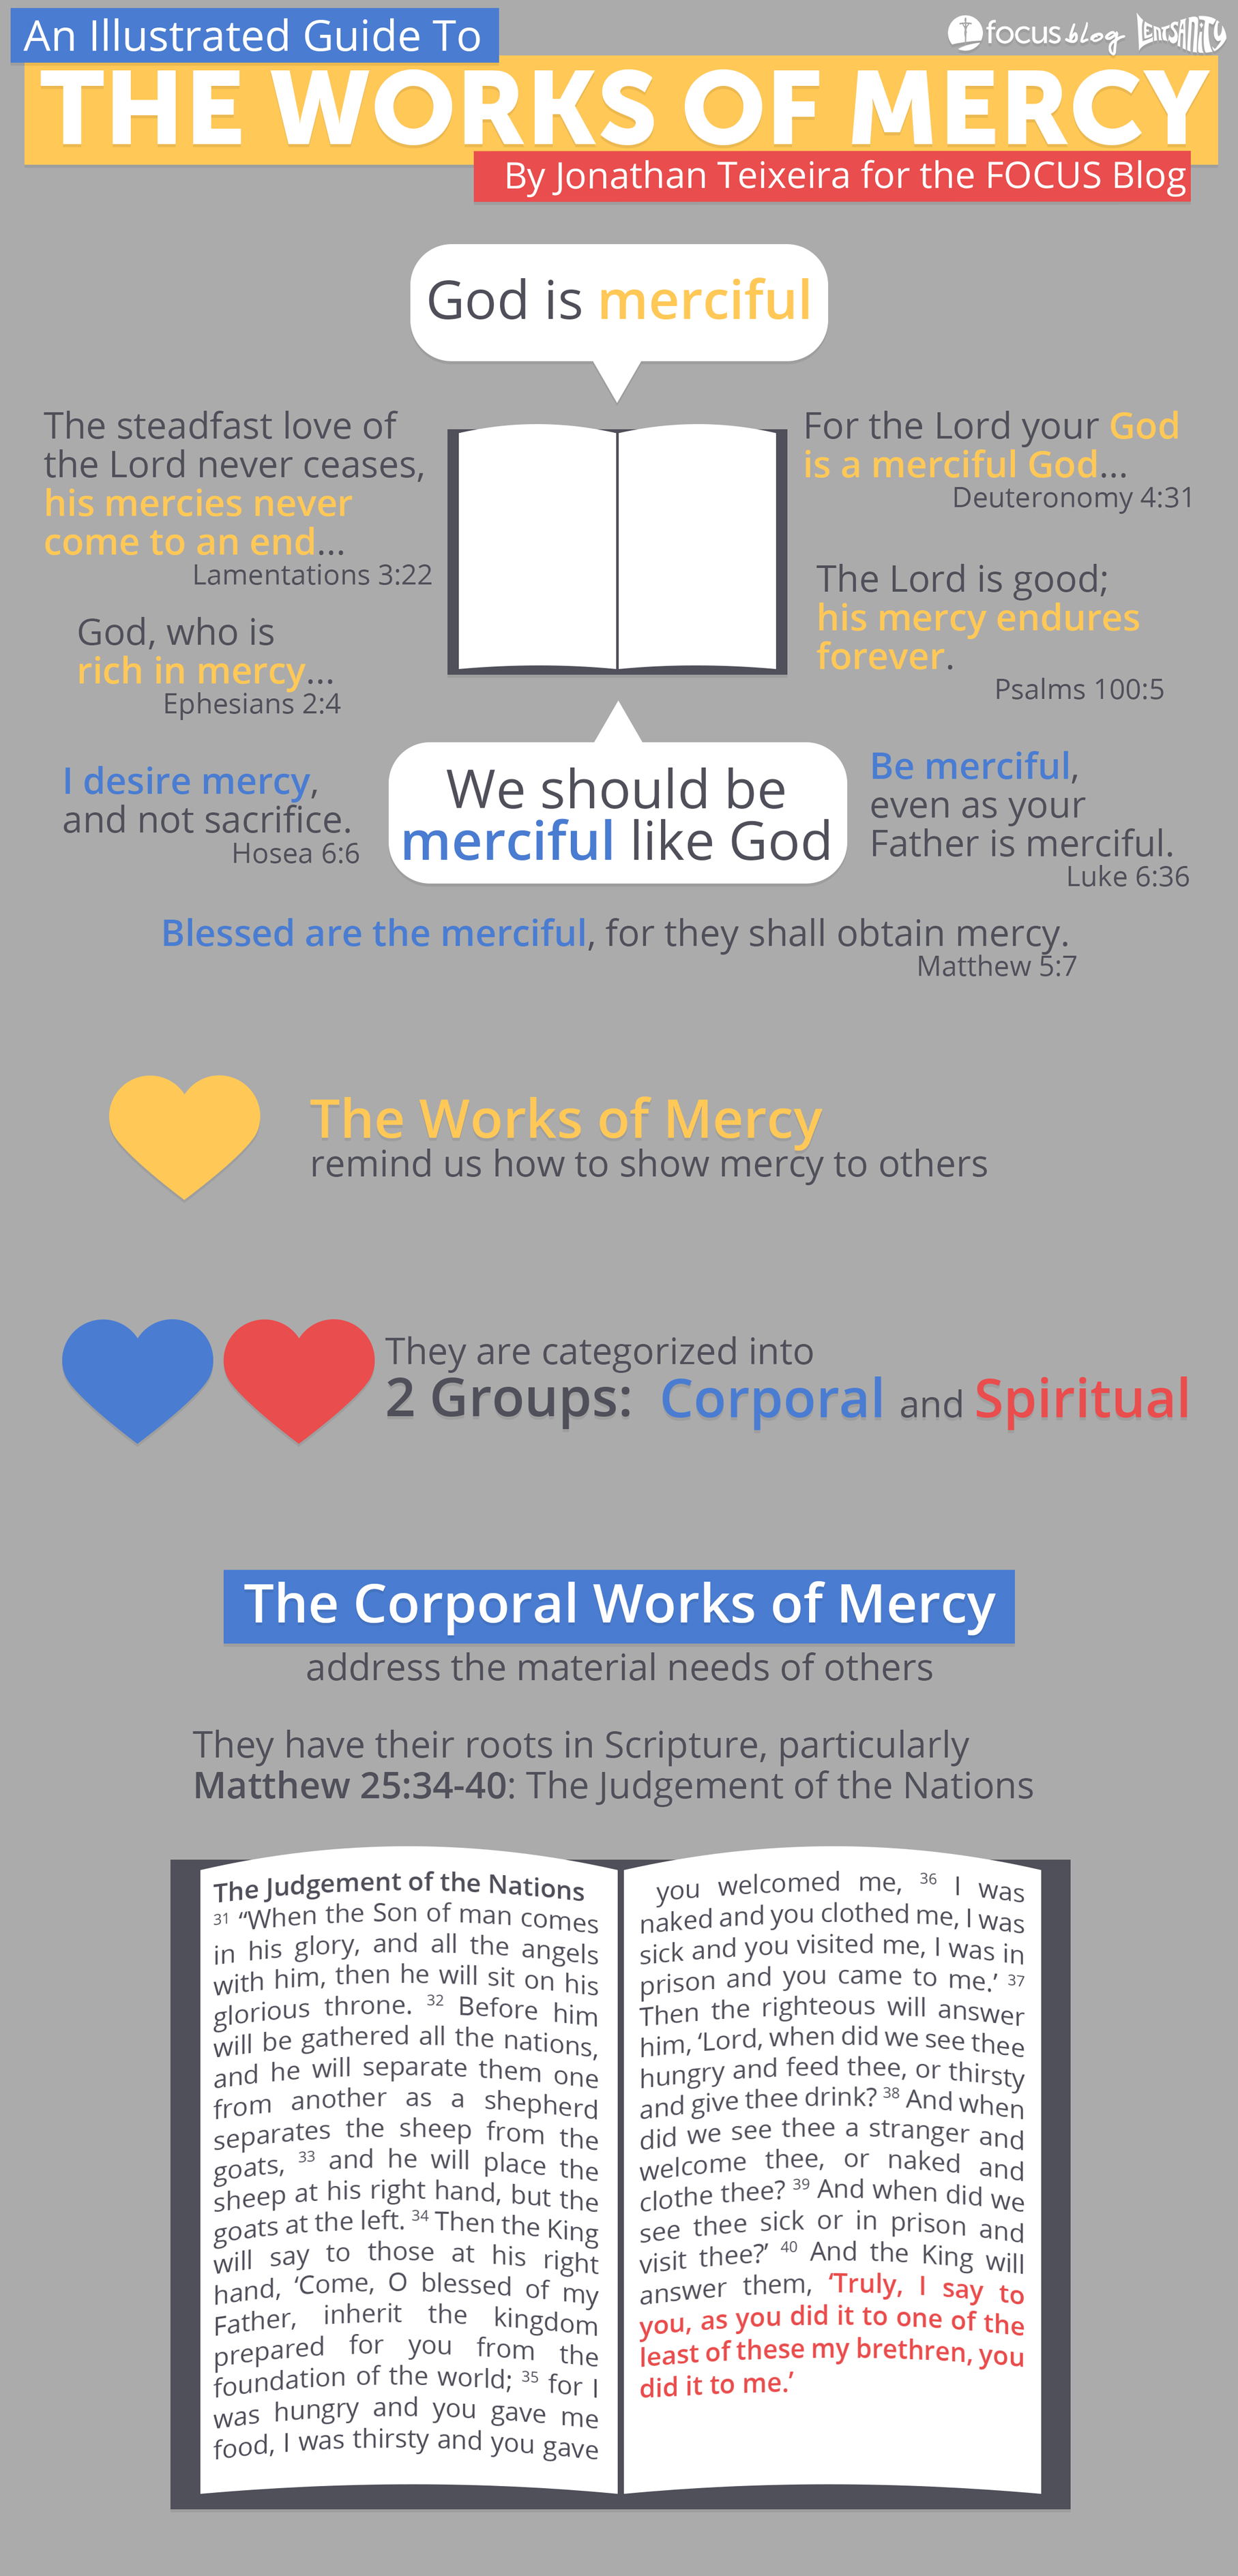 An Illustrated Guide to the Works of Mercy Top